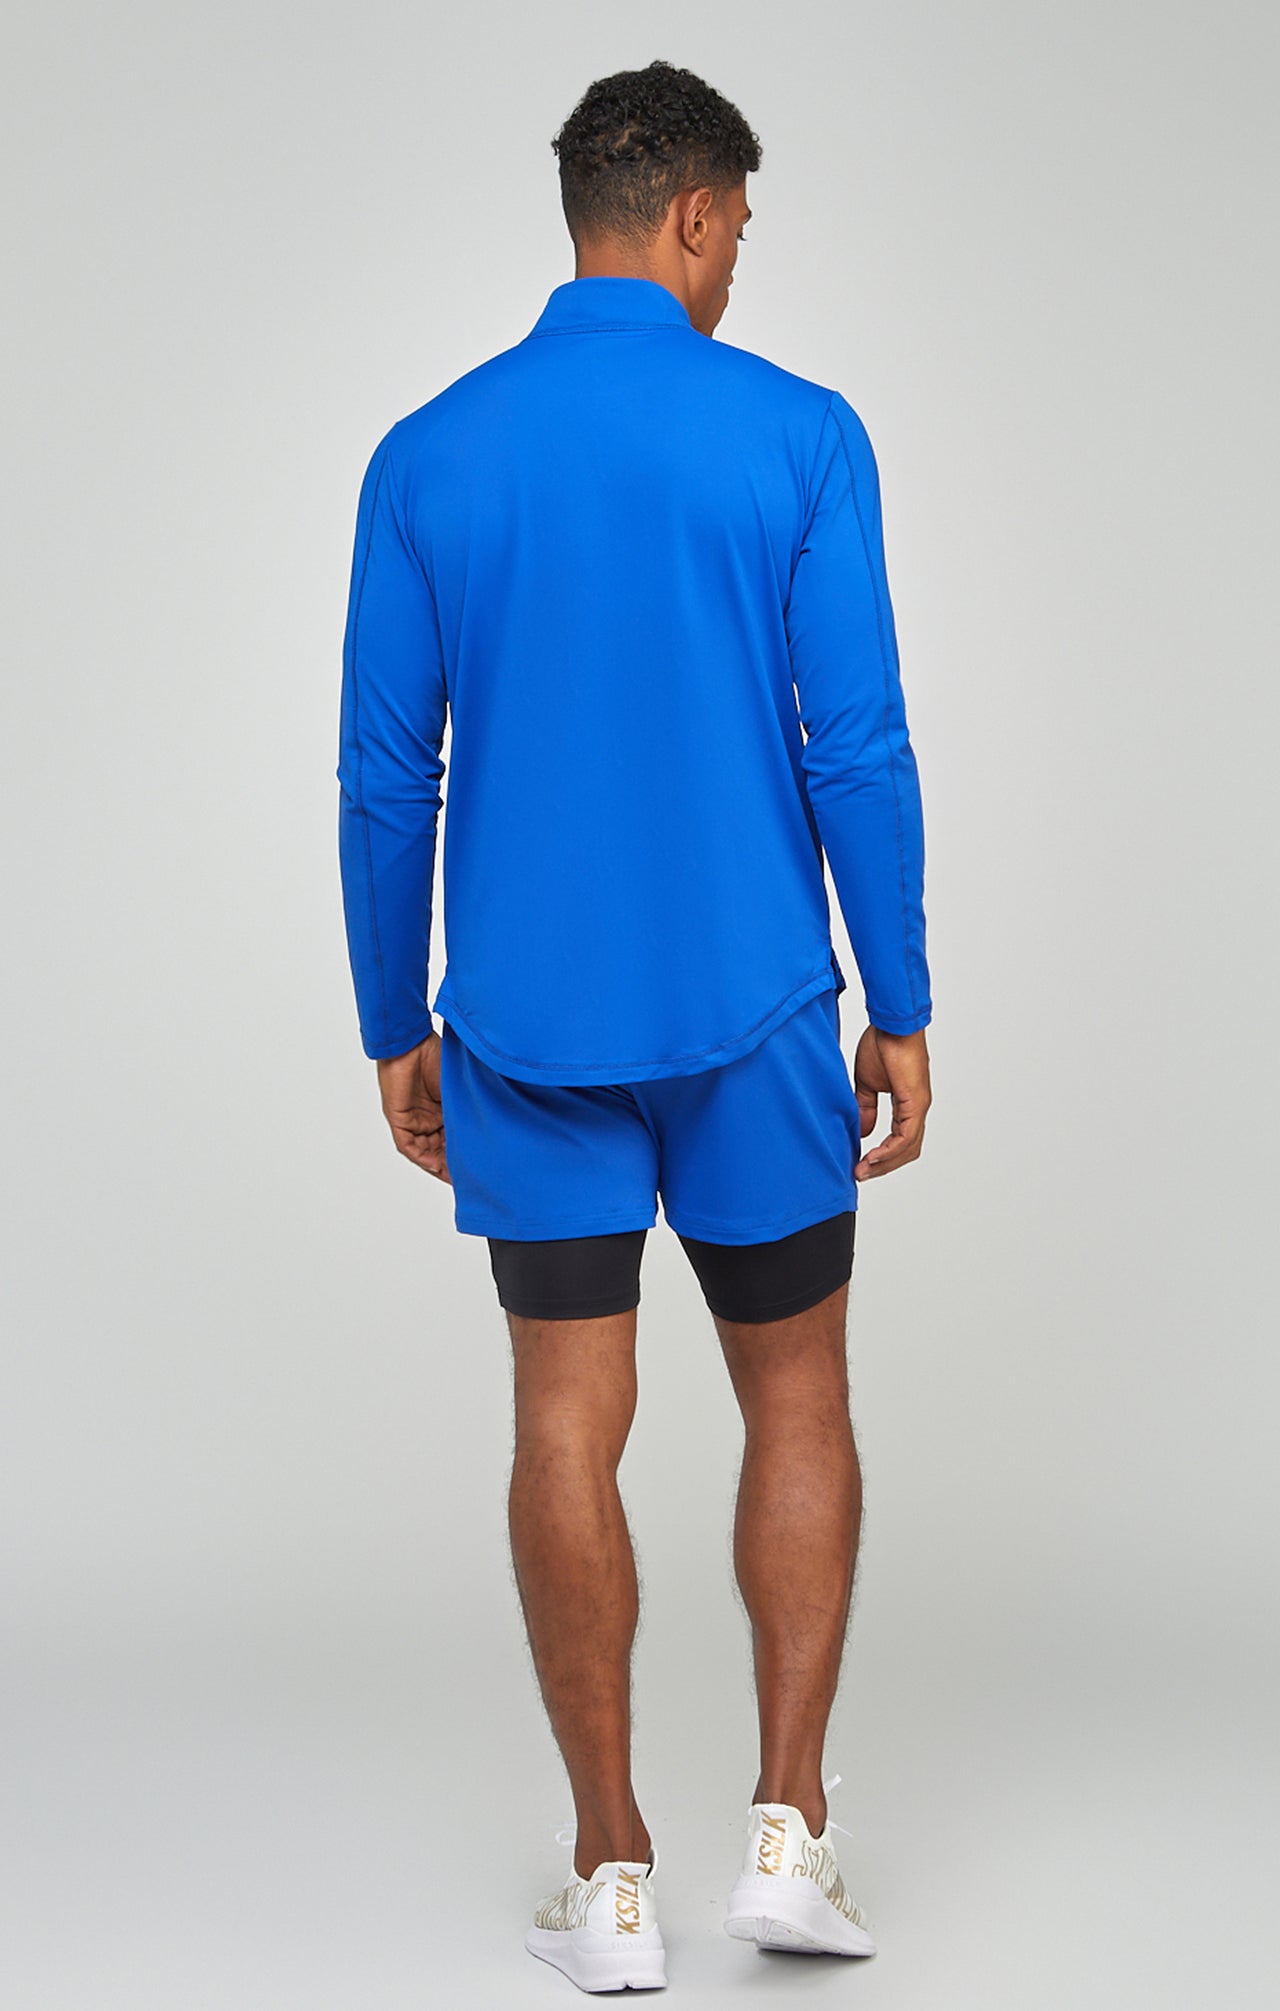 Blue Sports Muscle Fit Quarter Zip Long Sleeve Top (4)